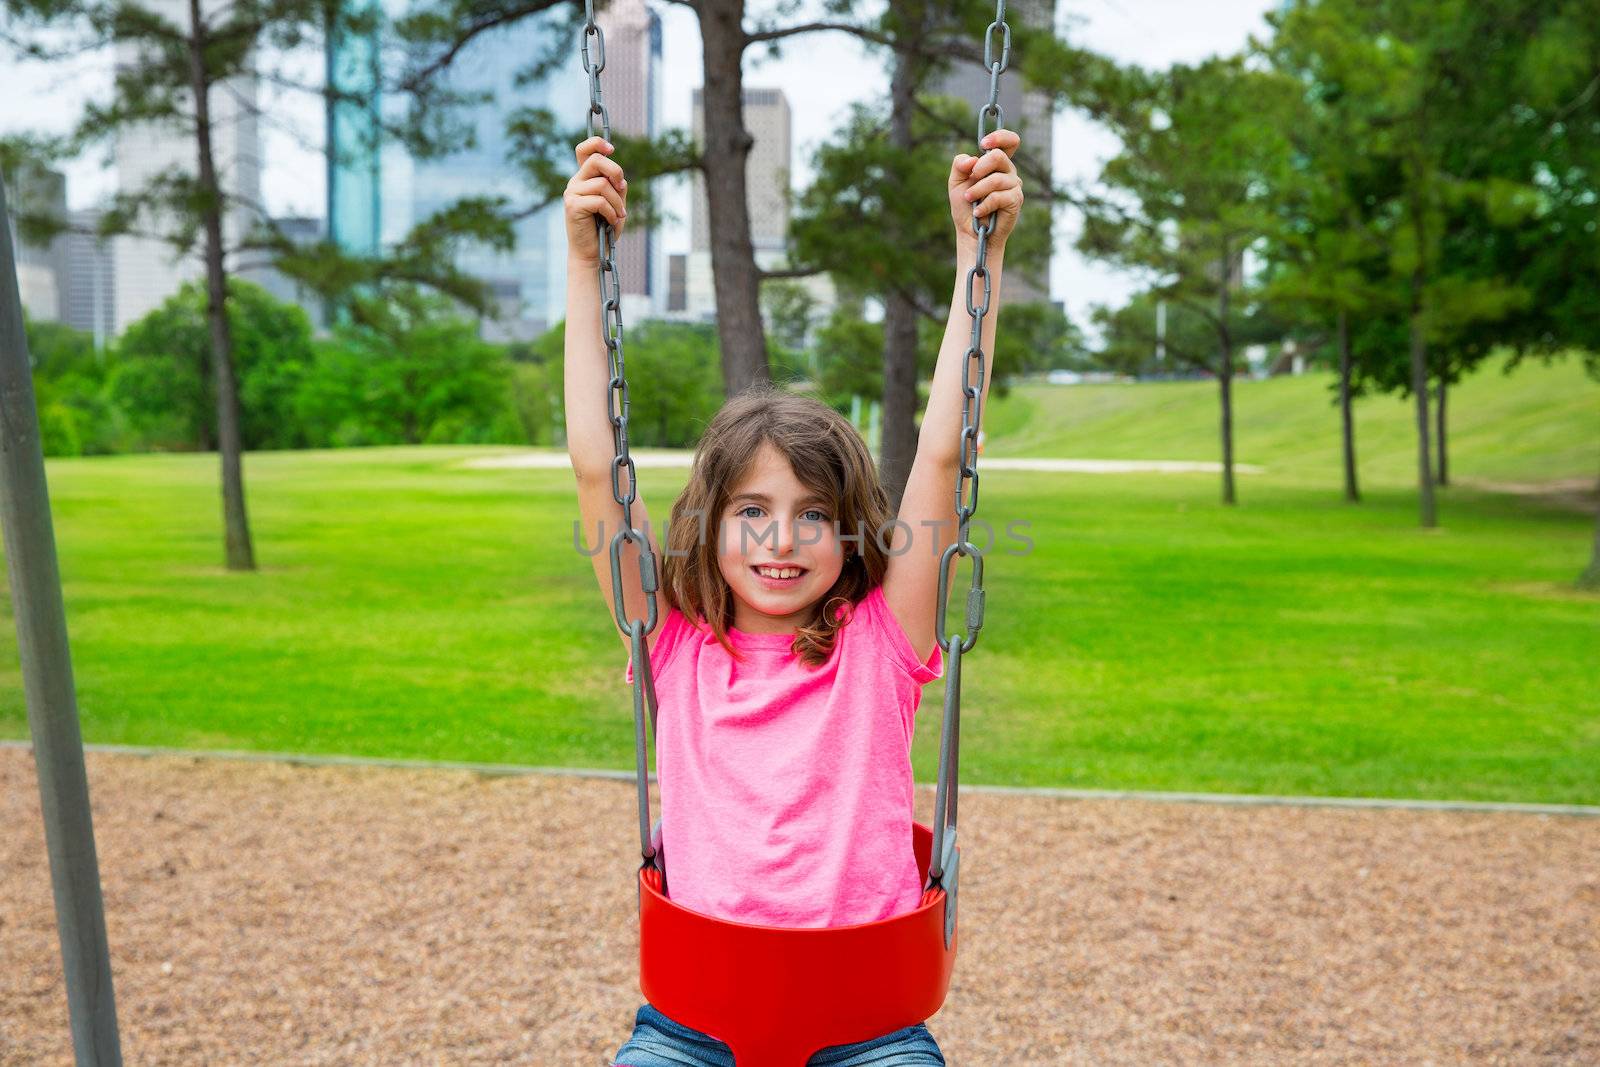 Brunette kid girl playing with swing on park with city skyline background